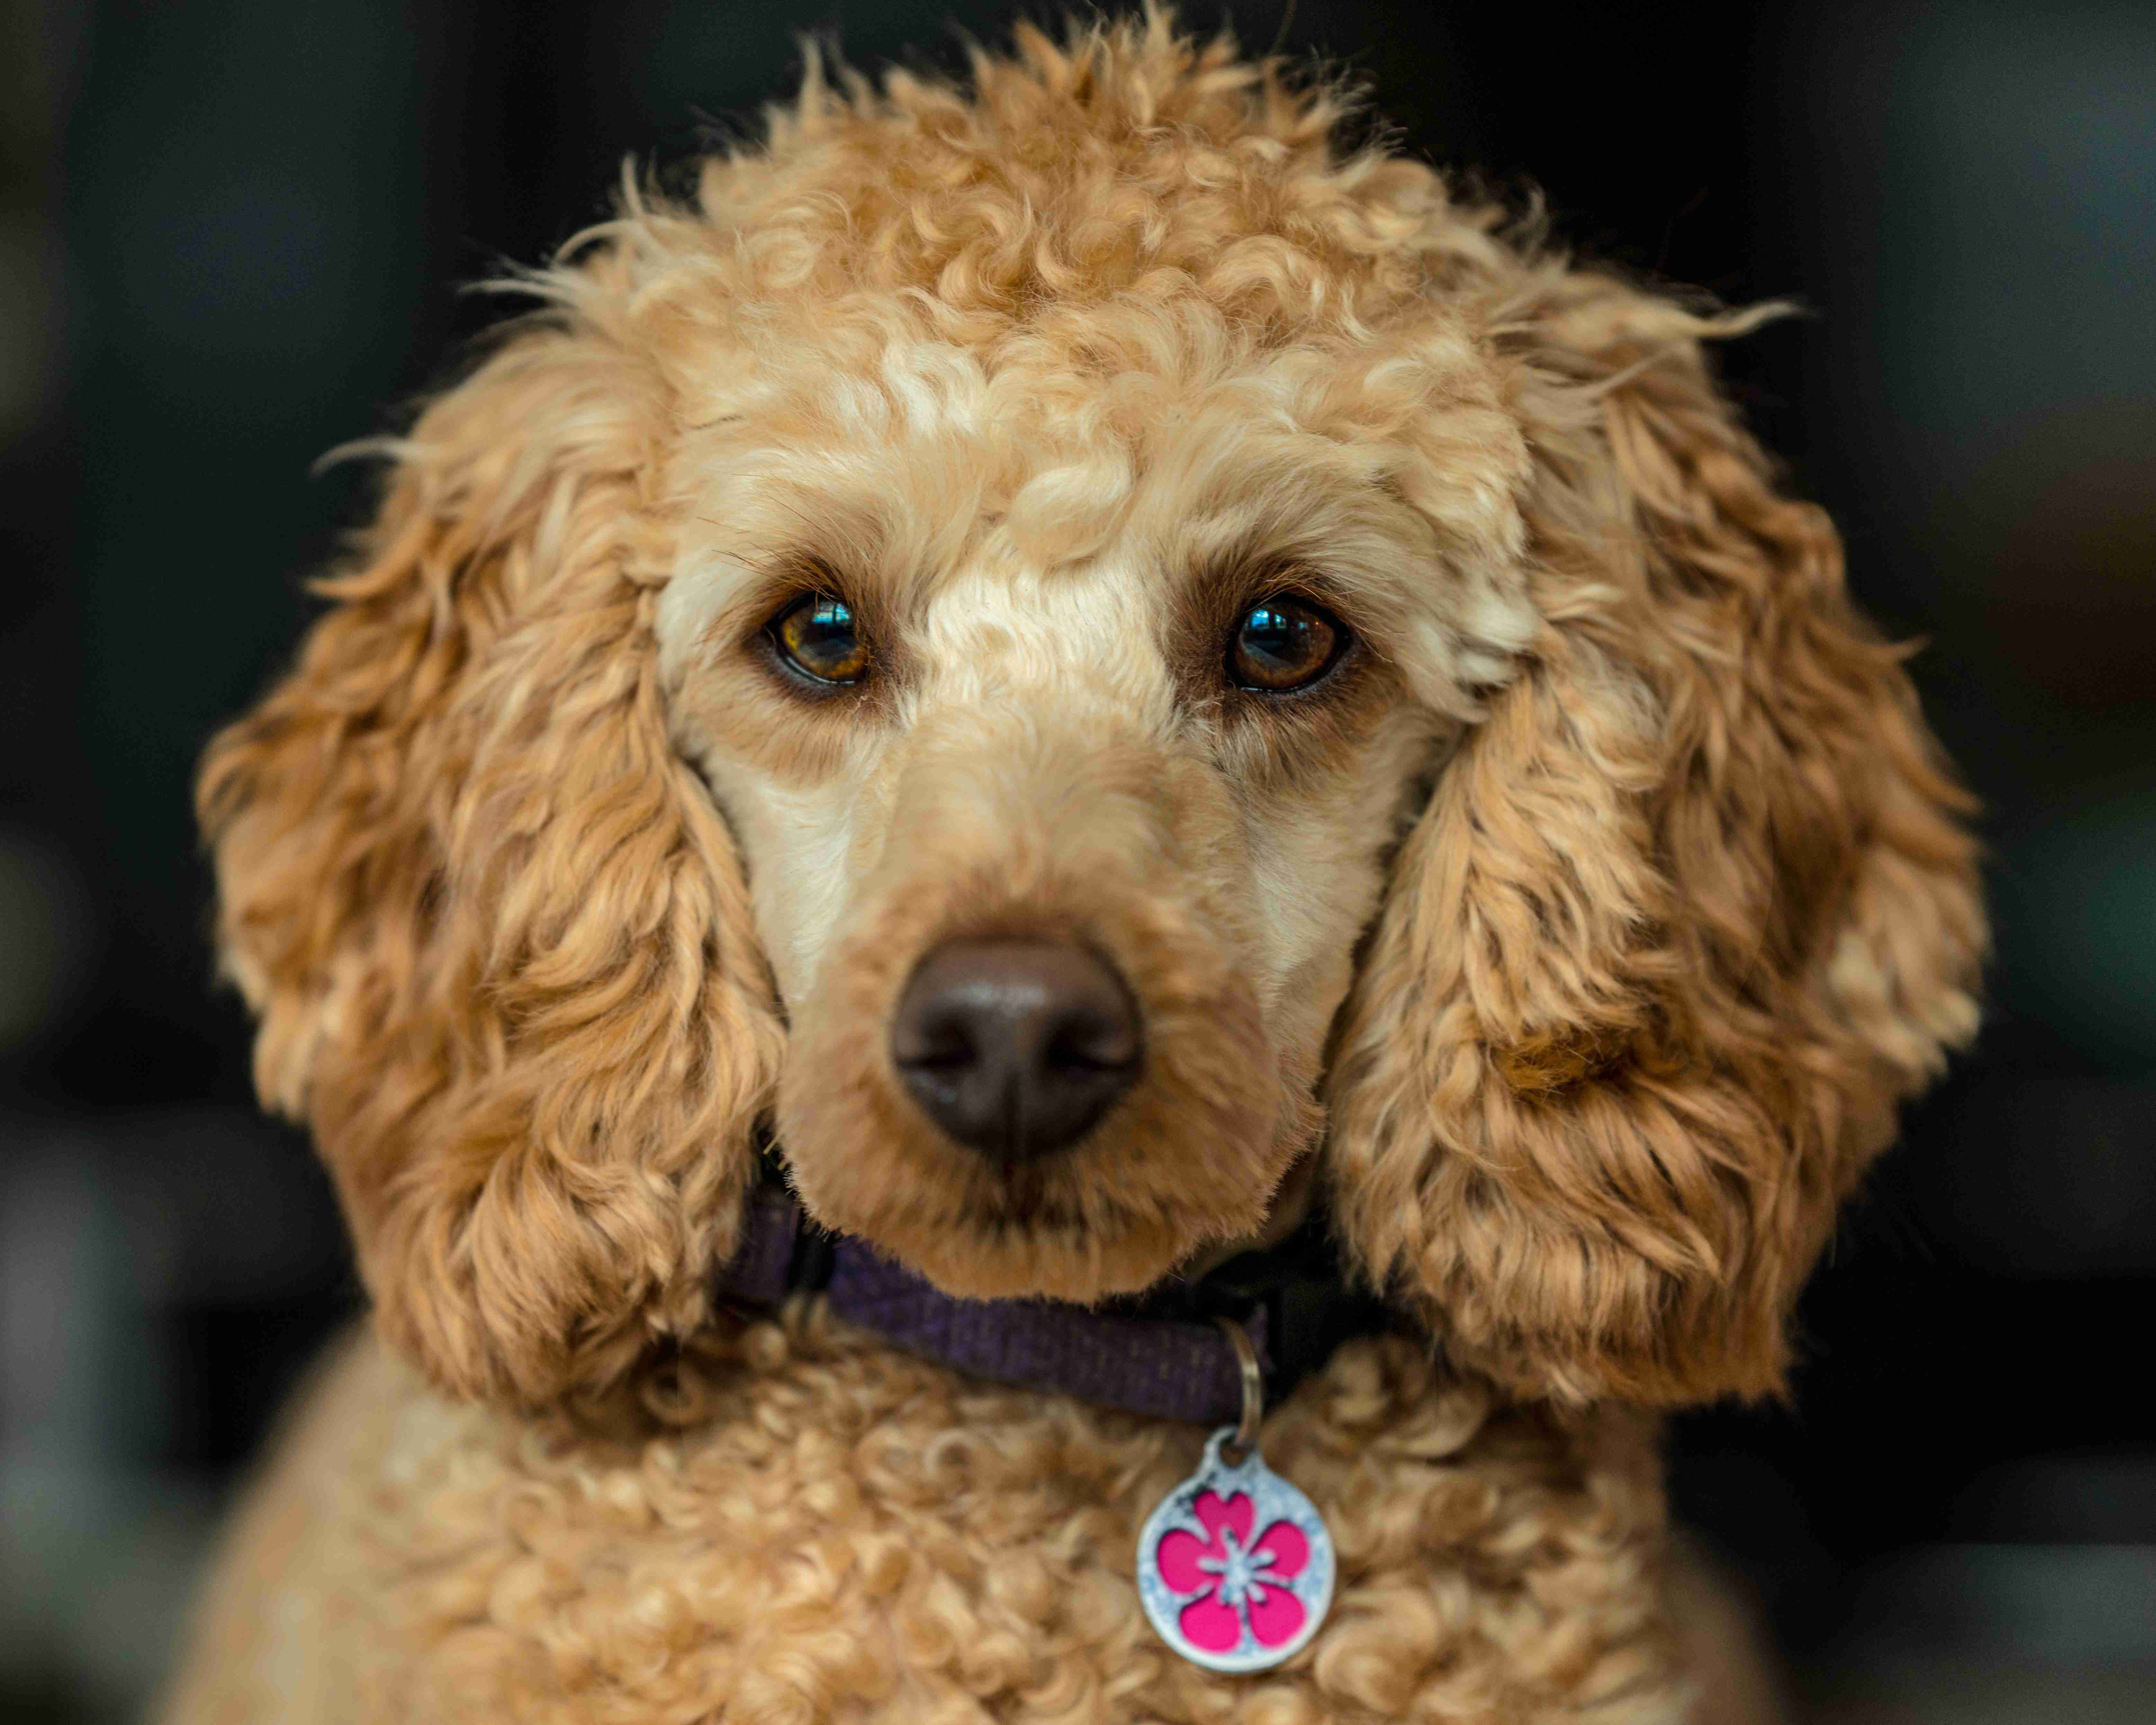 How can you ensure that your Poodle puppy feels safe and comfortable in their new environment?